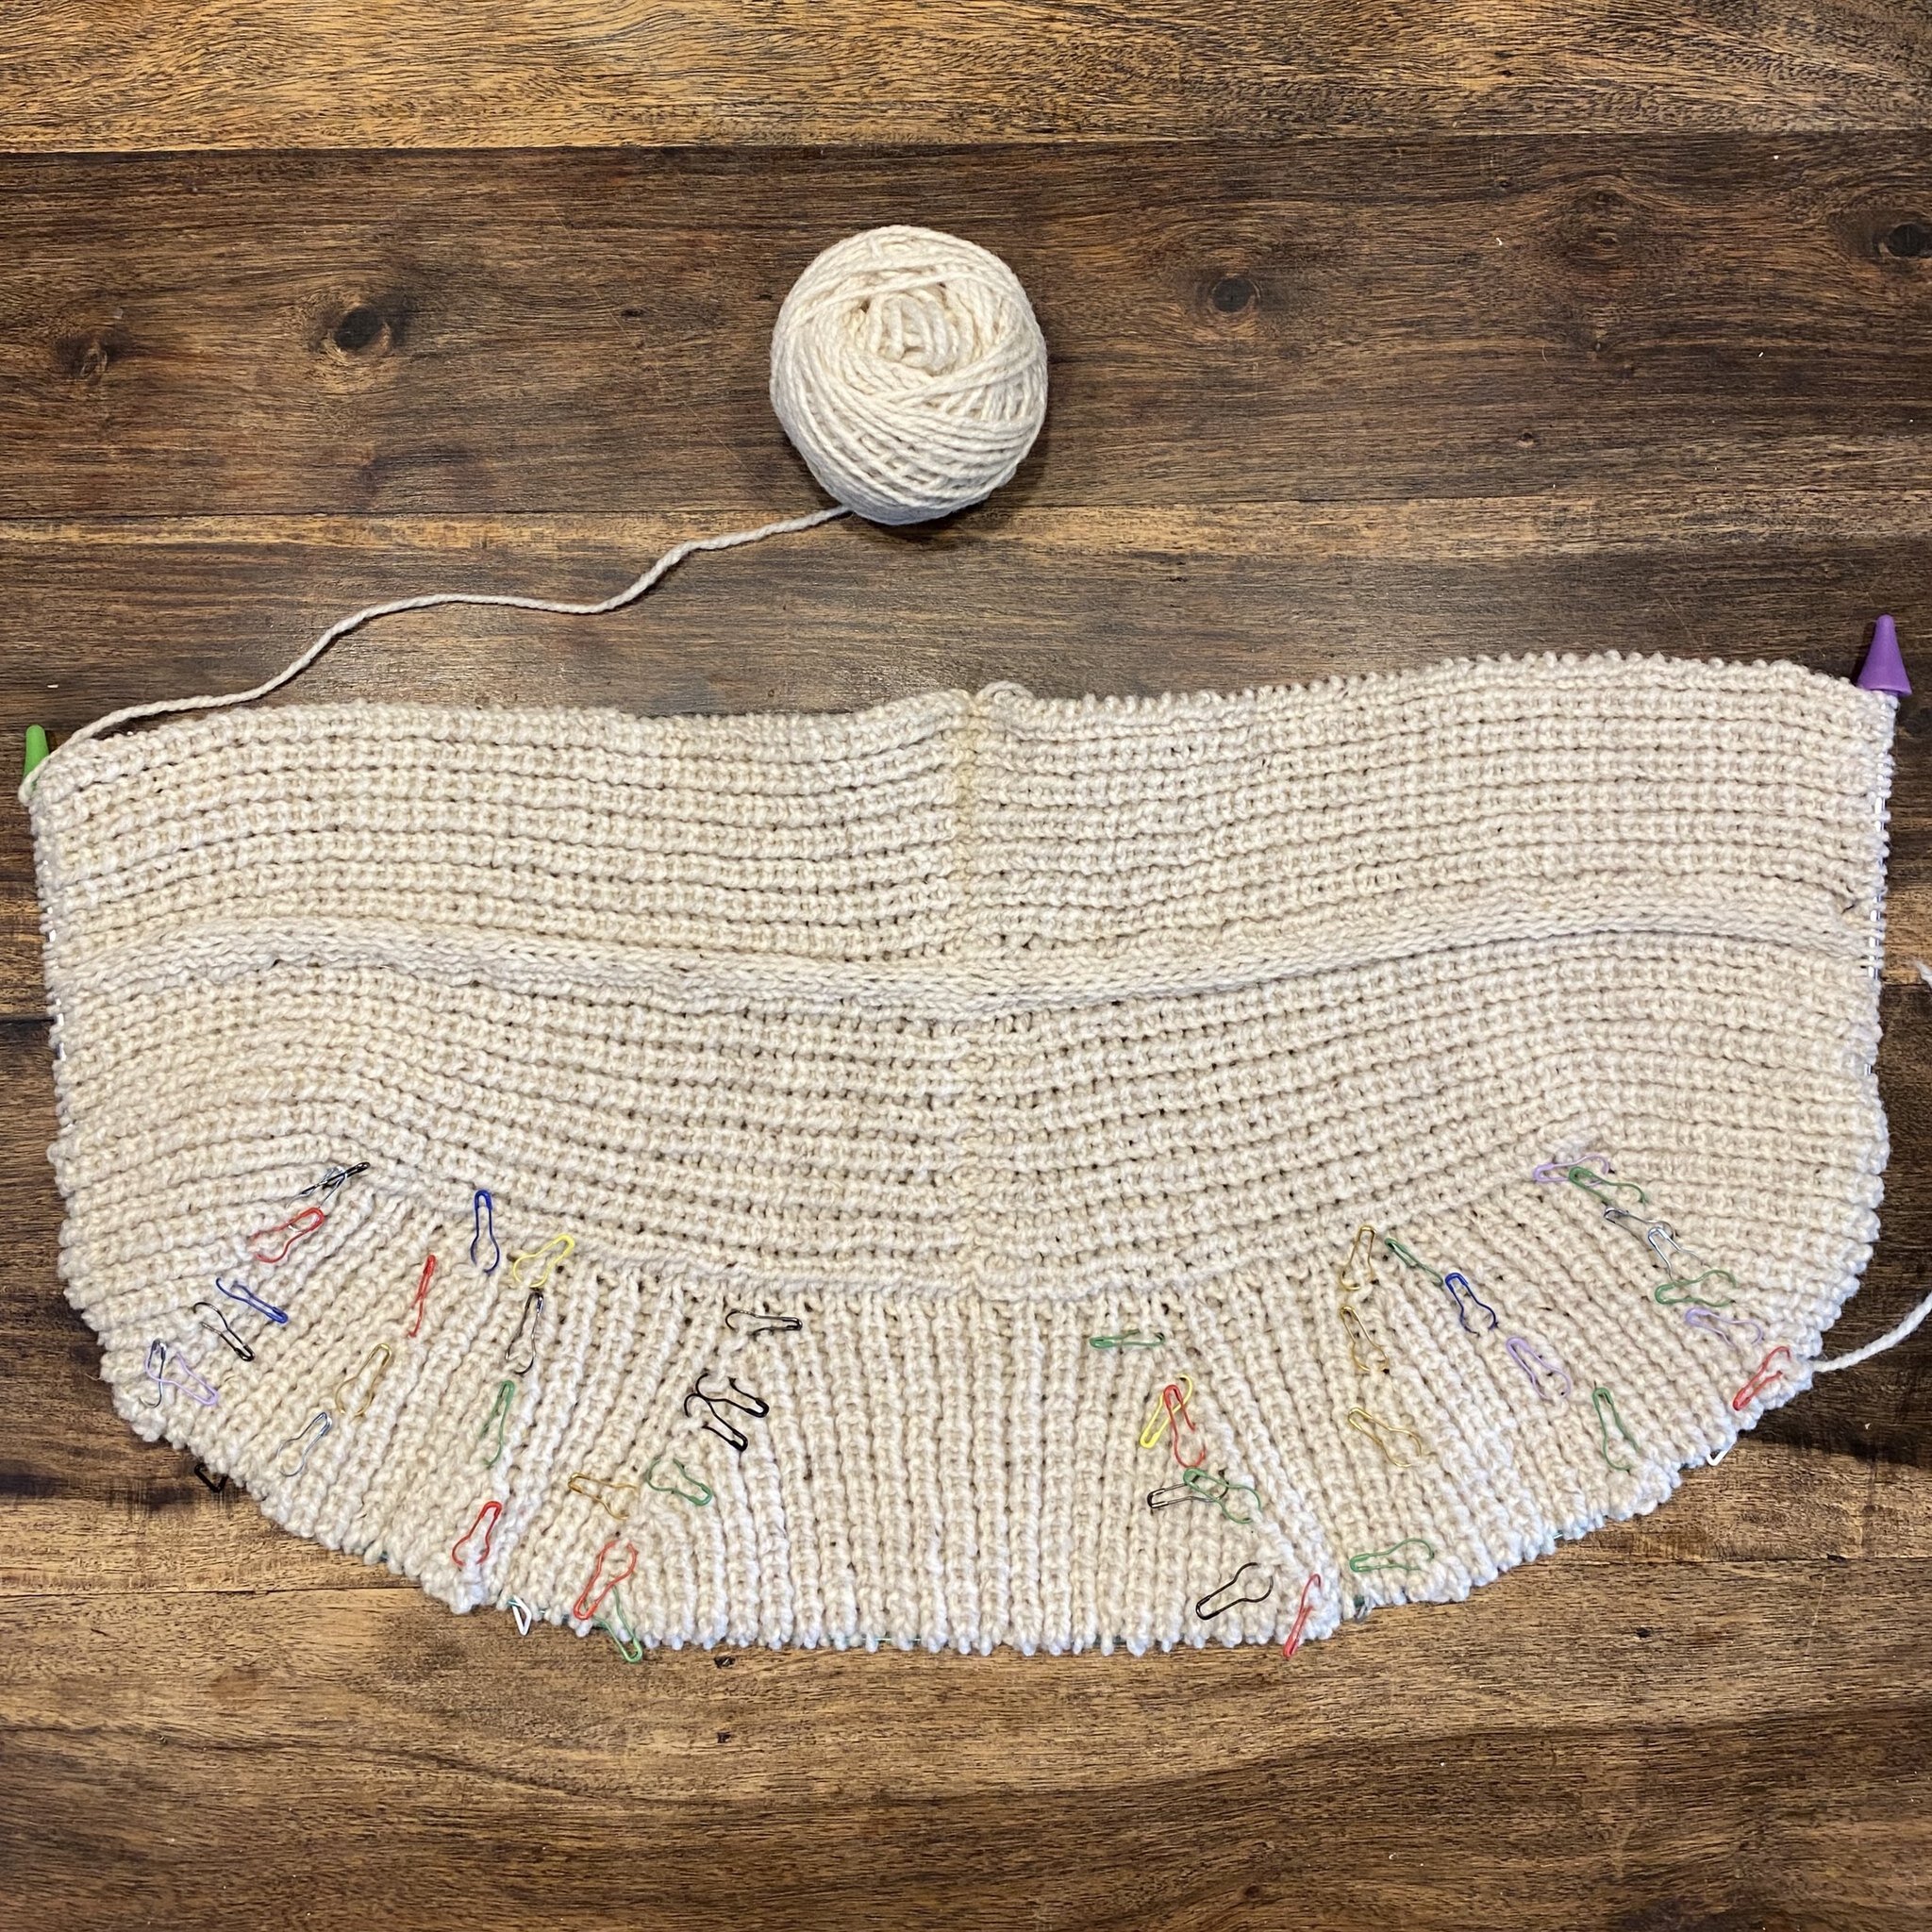 Brooke's Reading Cardigan is coming along! Keep an eye out for the next blog post coming this Saturday. Click the link in bio to read the first two posts where we talk about gauge, getting started, and some handy tricks to make knitting this cardigan